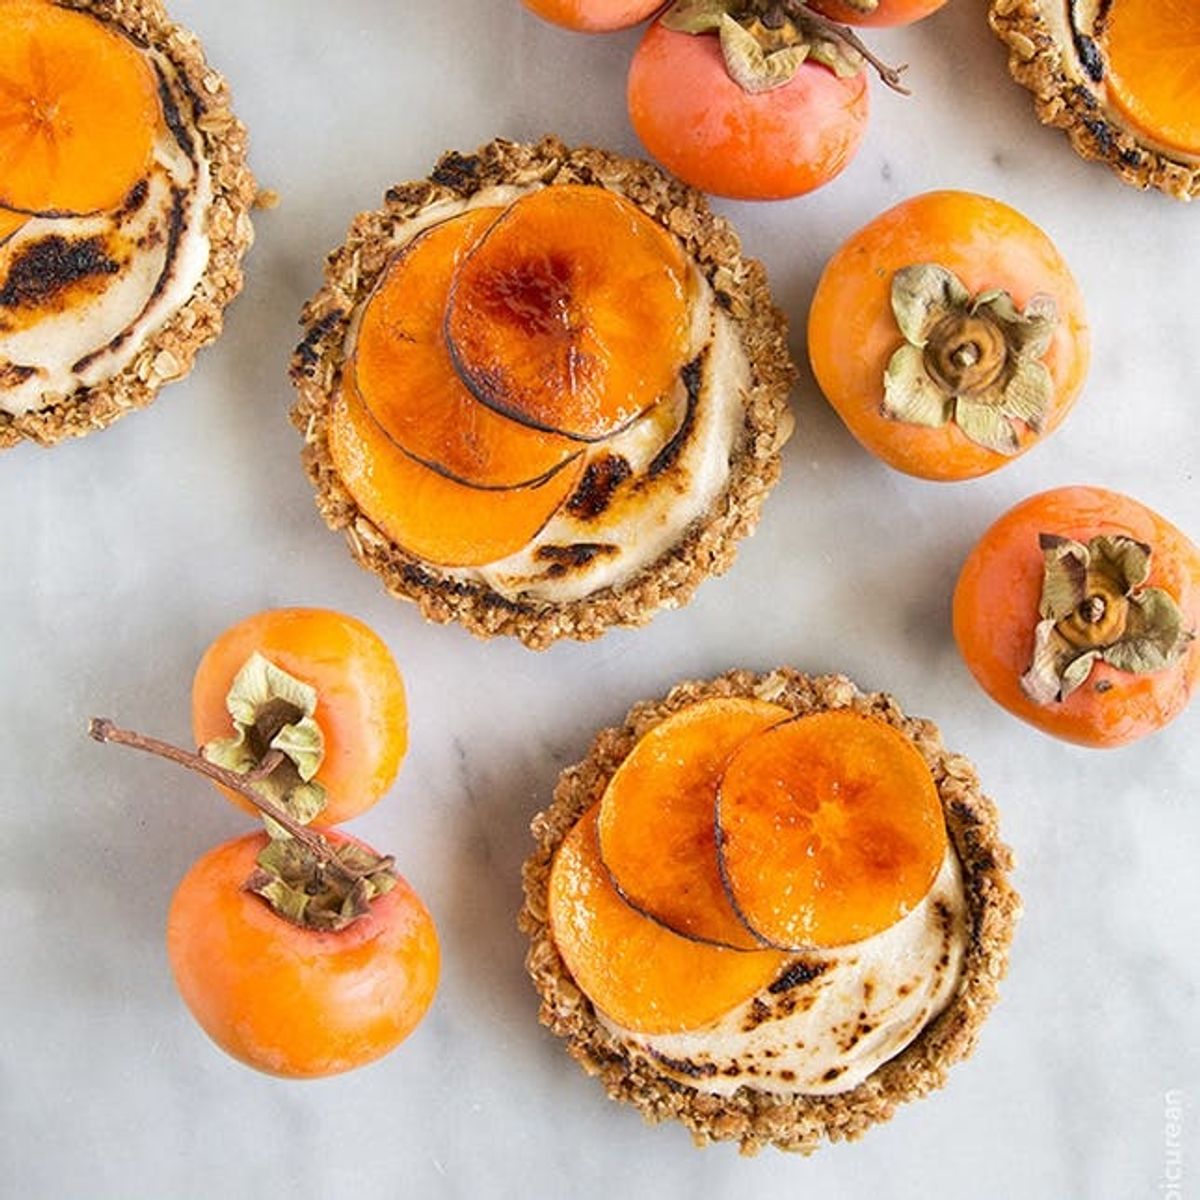 10 Party-Perfect Persimmon Recipes